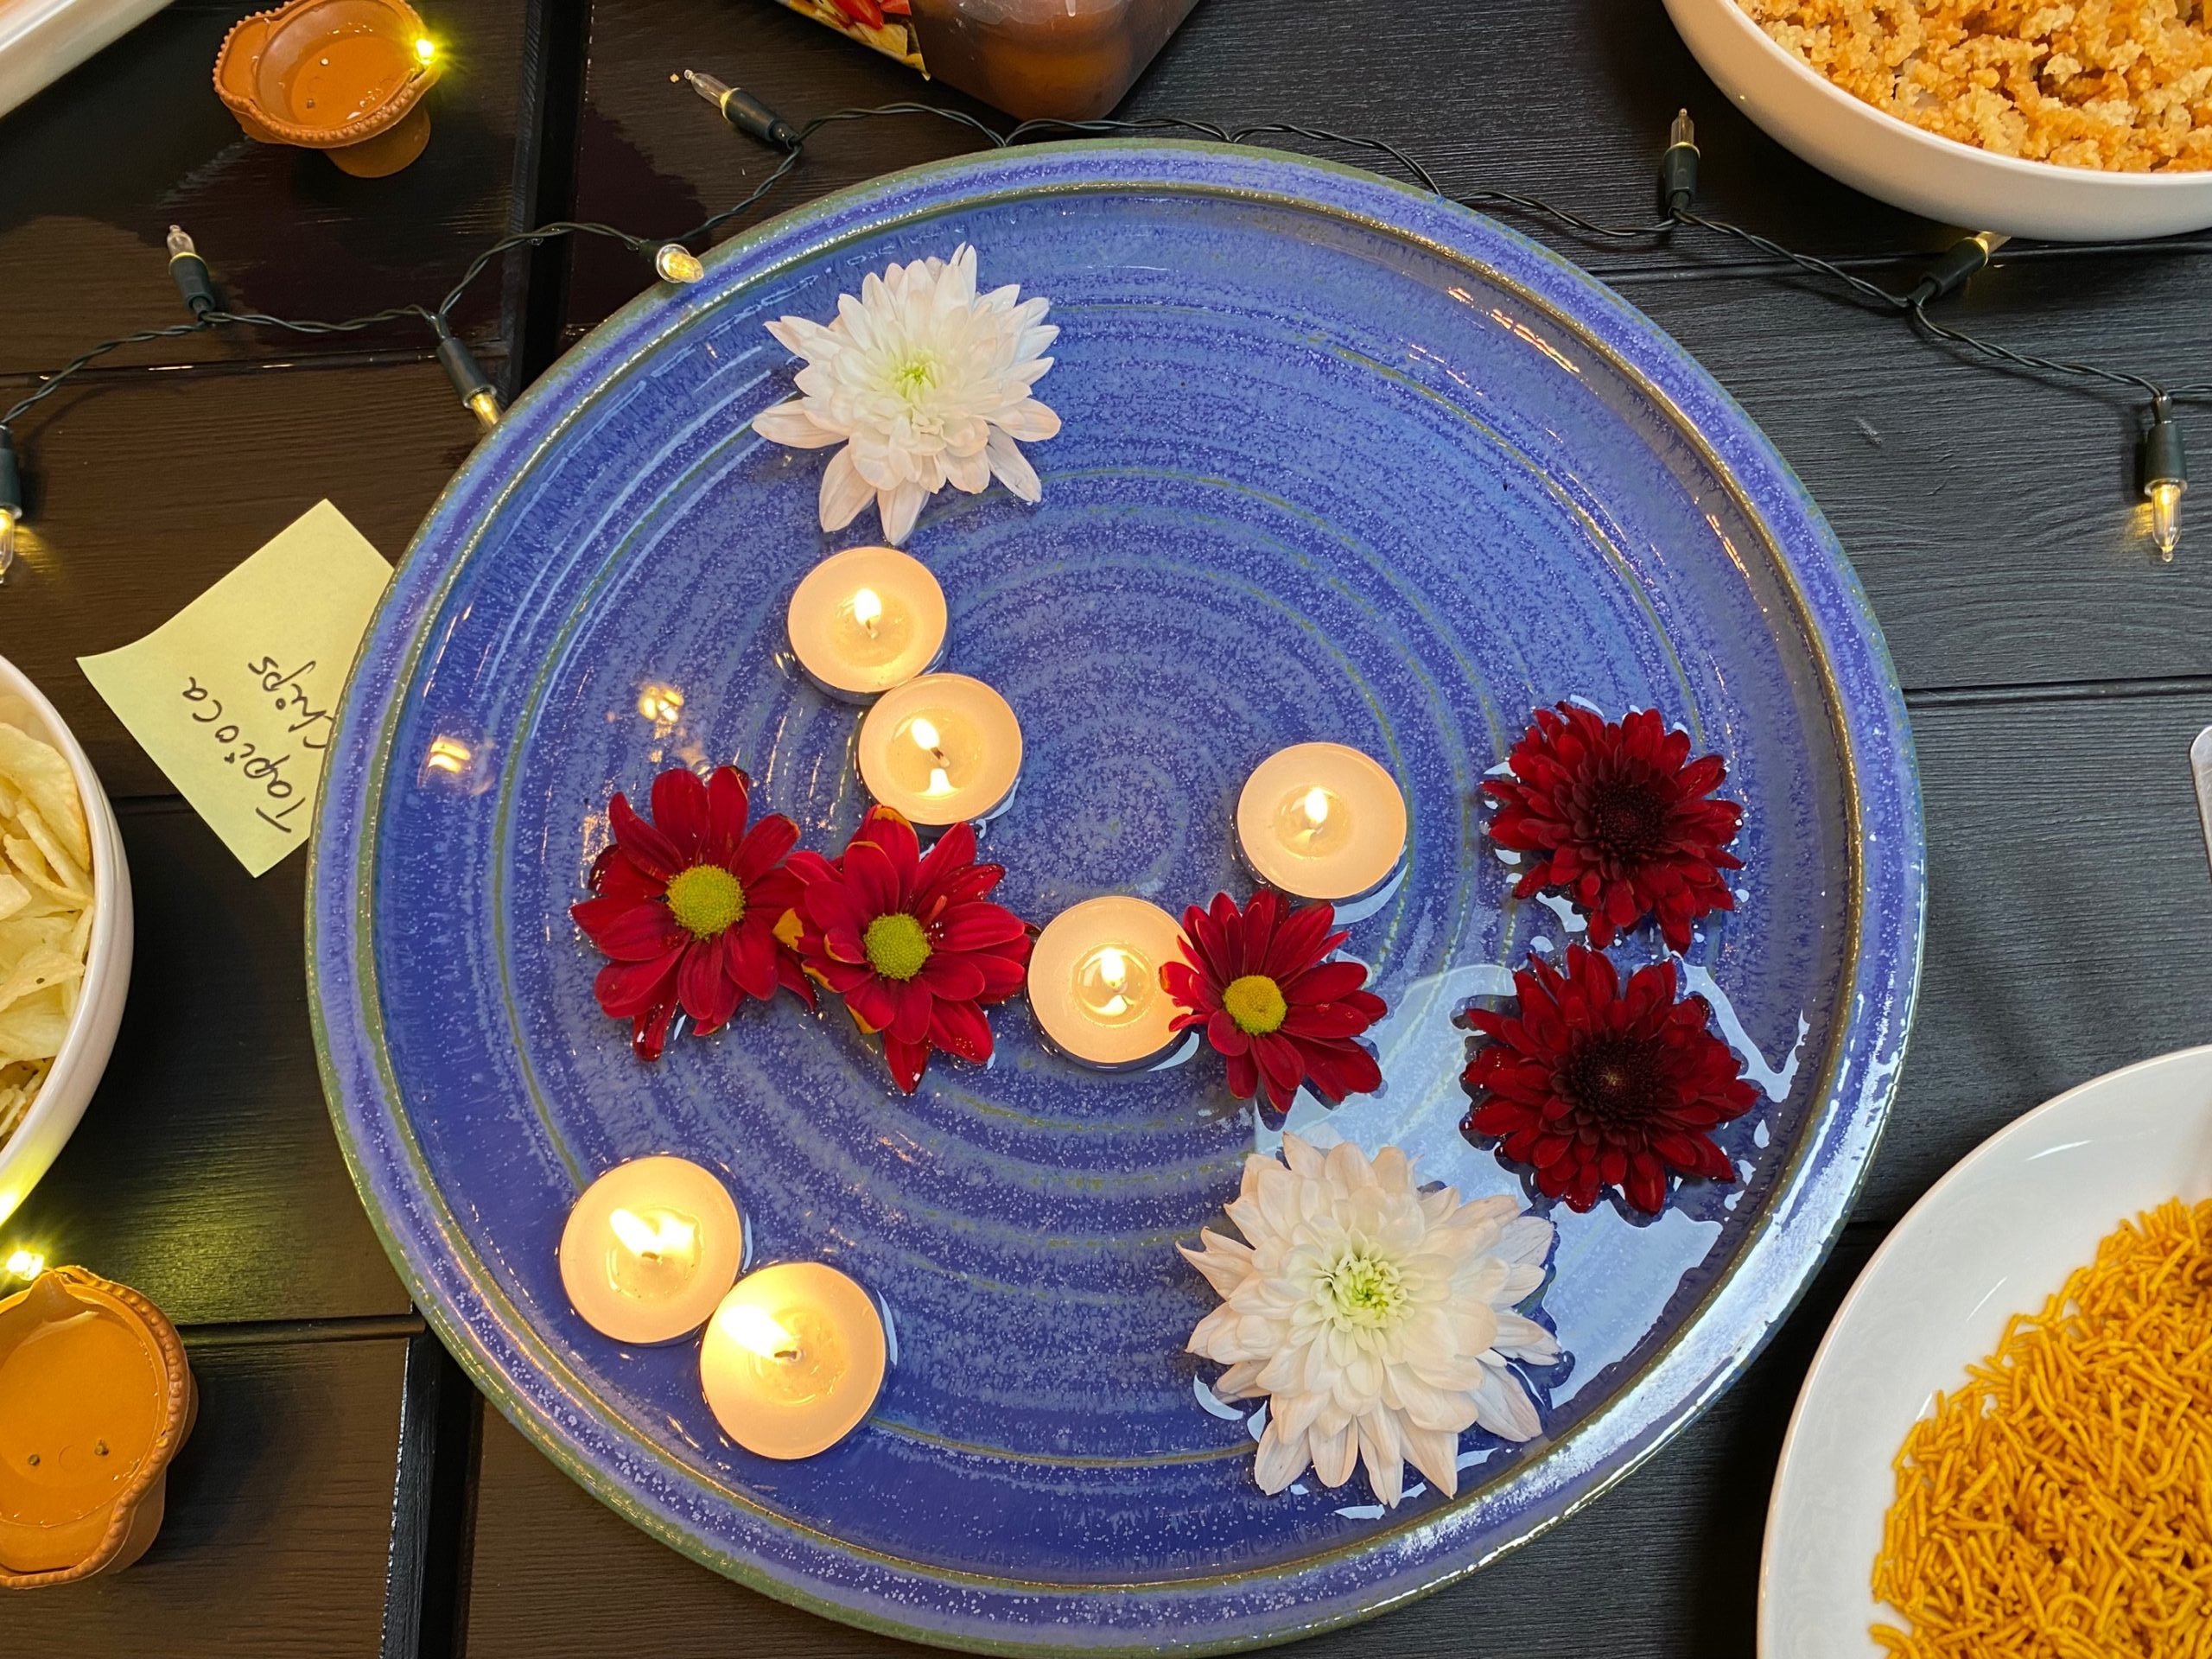 Decorative flowers and candles in water on a plate